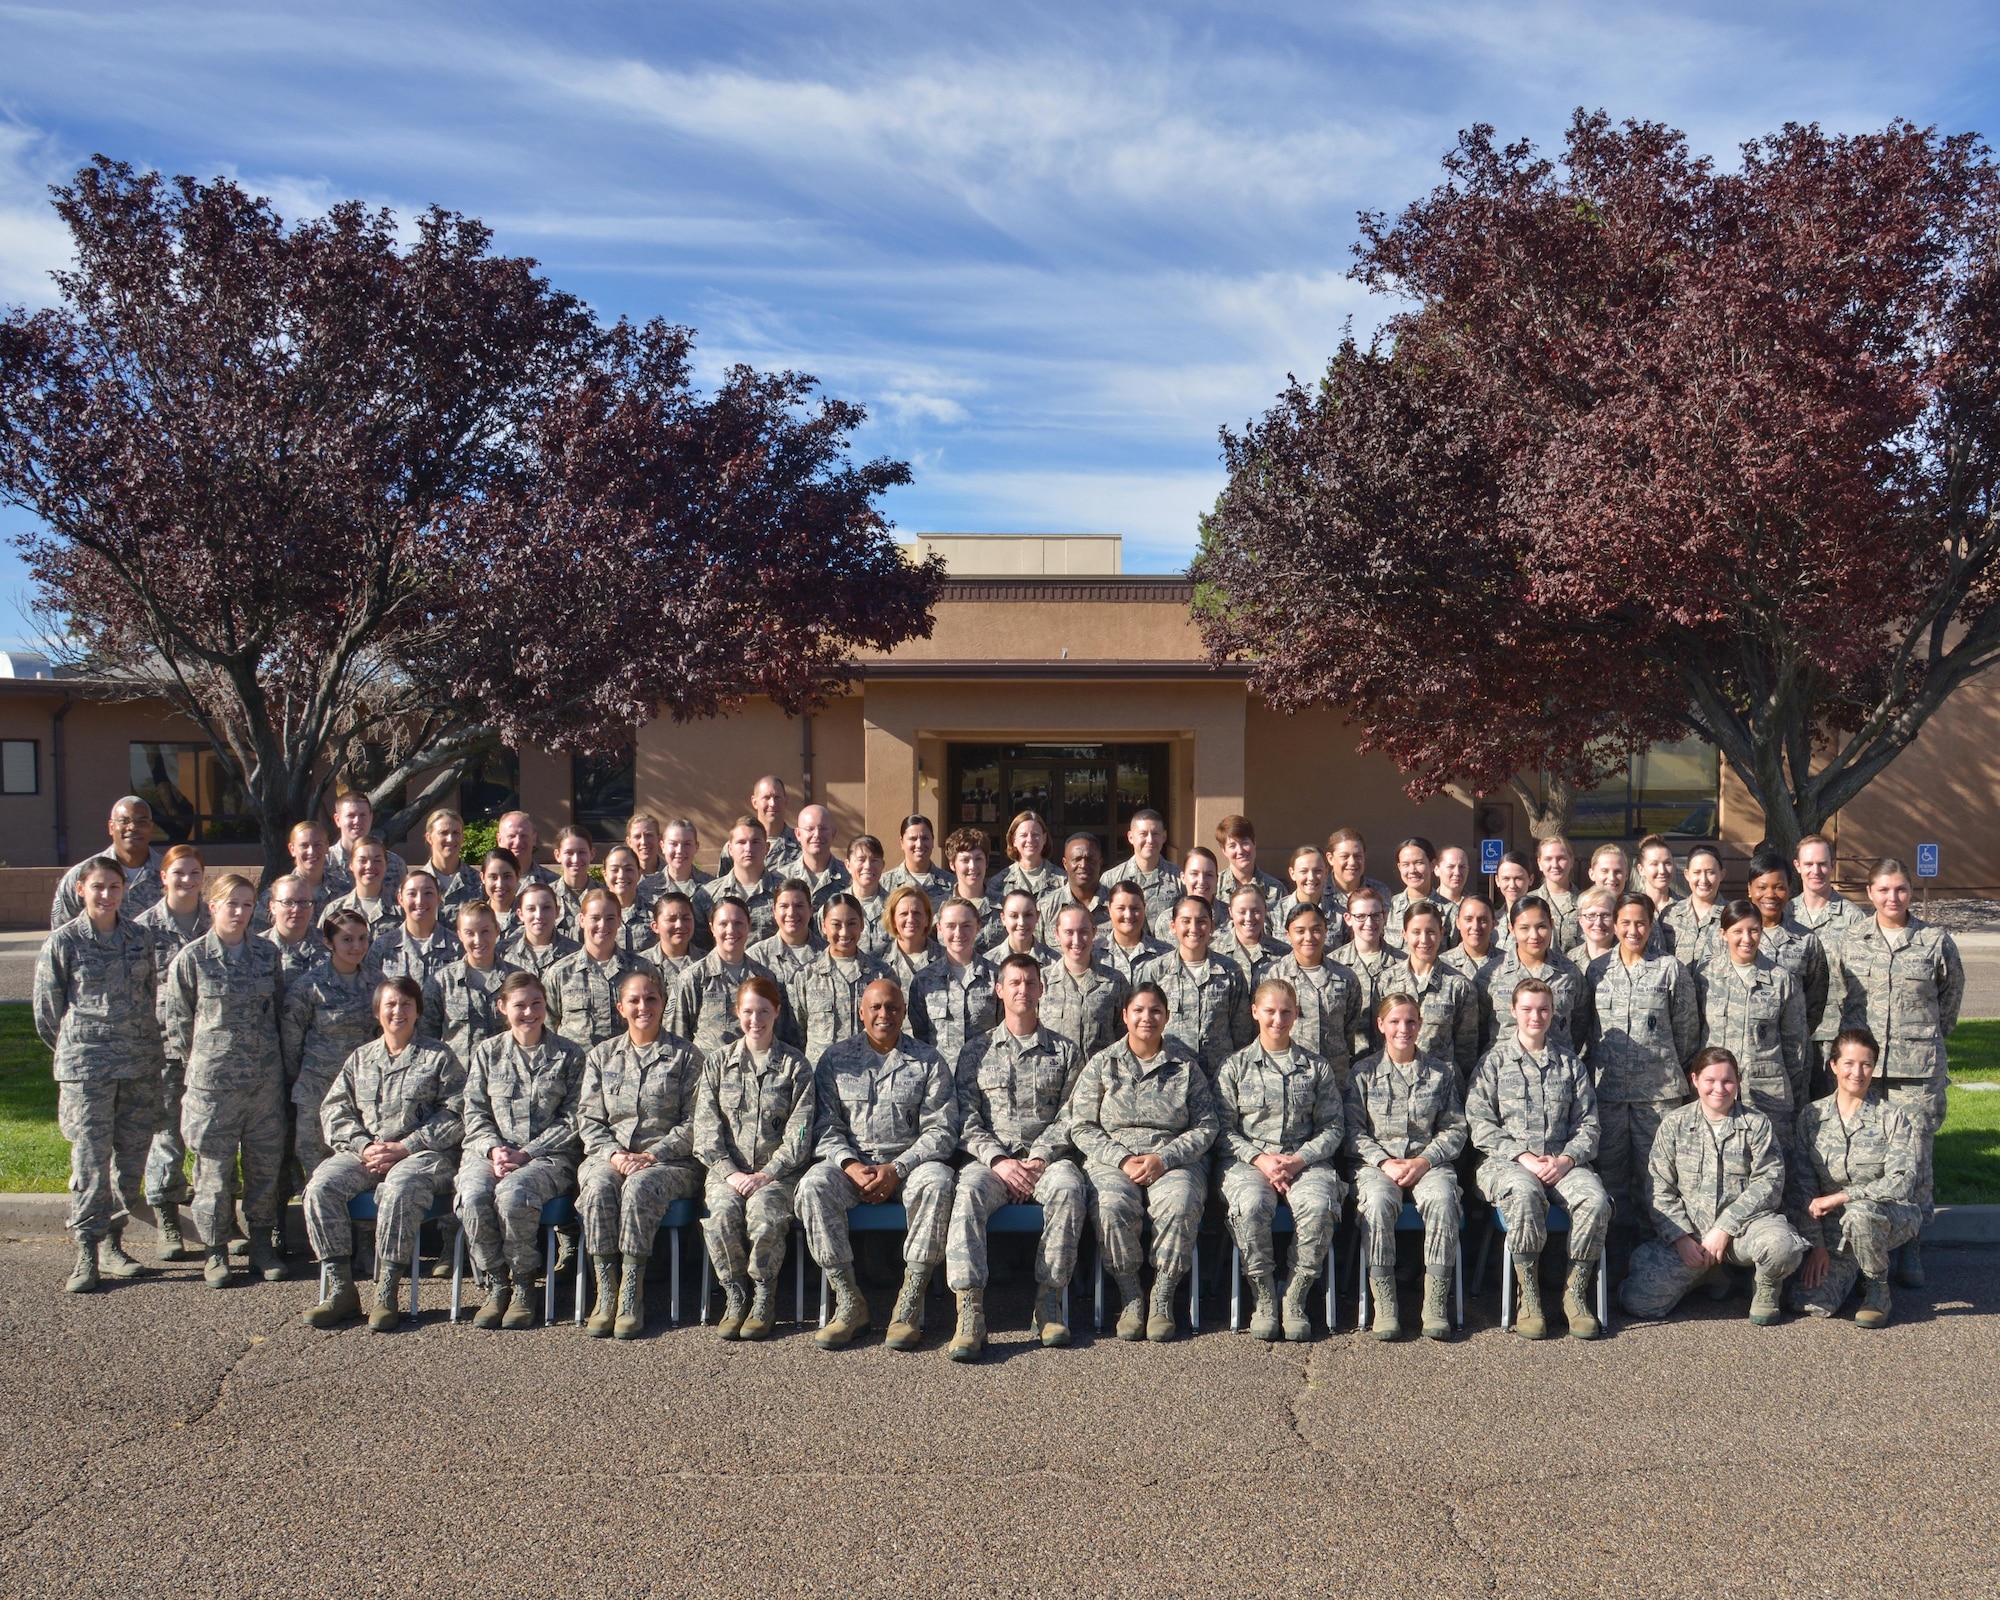 Senior leaders, mentors and Airmen pose for a group photo at the second 20th Air Force Women’s Leadership Symposium at Kirtland Air Force Base, N.M., Sept. 28, 2016. The event brought male and female Airmen together to discuss leadership topics with military senior leaders. The three-day event supports 20th AF’s goal to coach, train and mentor nuclear professionals and leaders, while developing a nuclear command environment that fosters understanding, respect and the support necessary for people to thrive. (U.S. Air Force photo by Jamie Burnett)